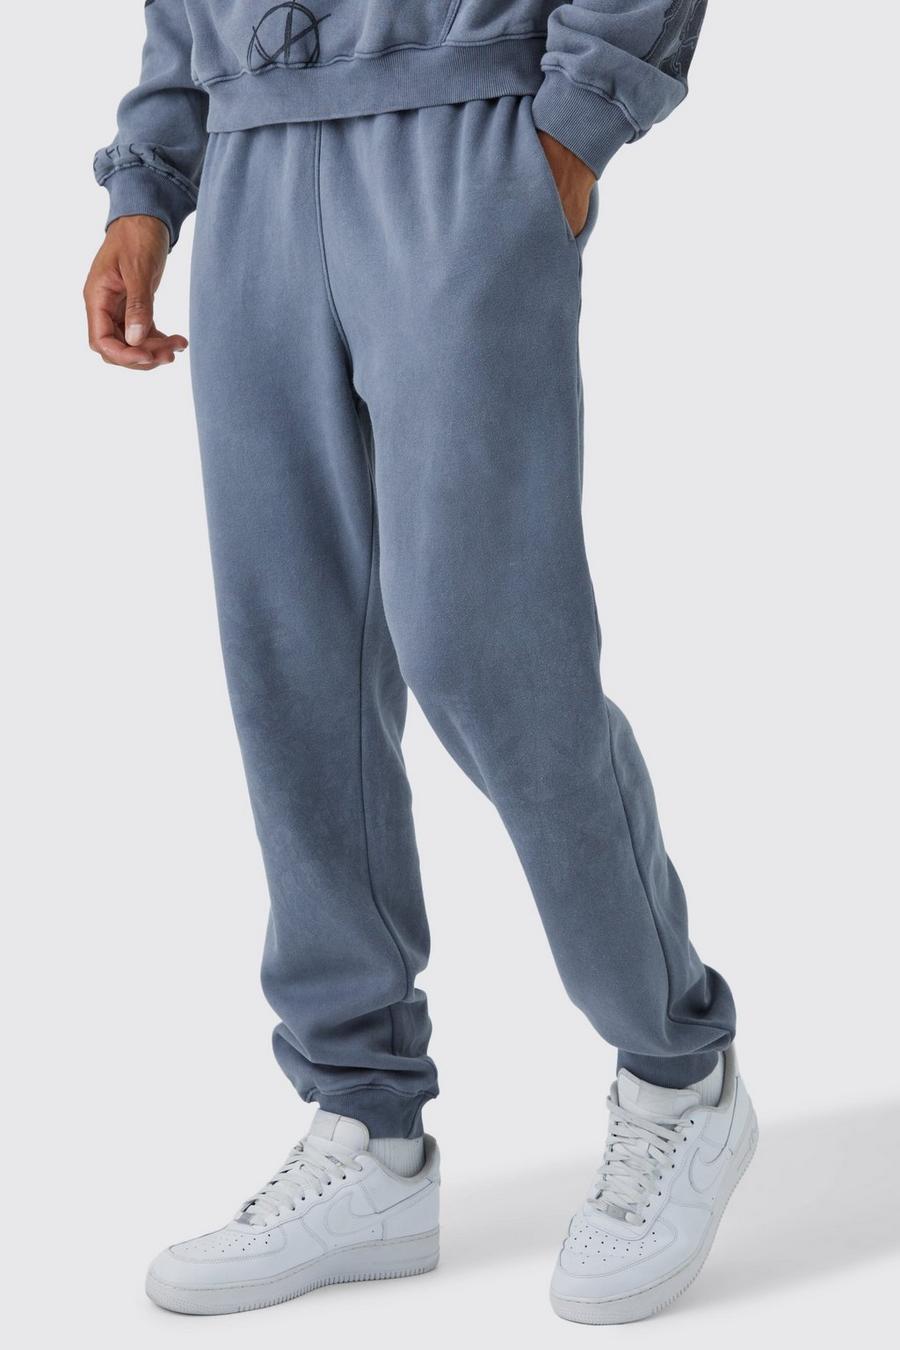 Charcoal grey Tall Core Acid Washed Jogger